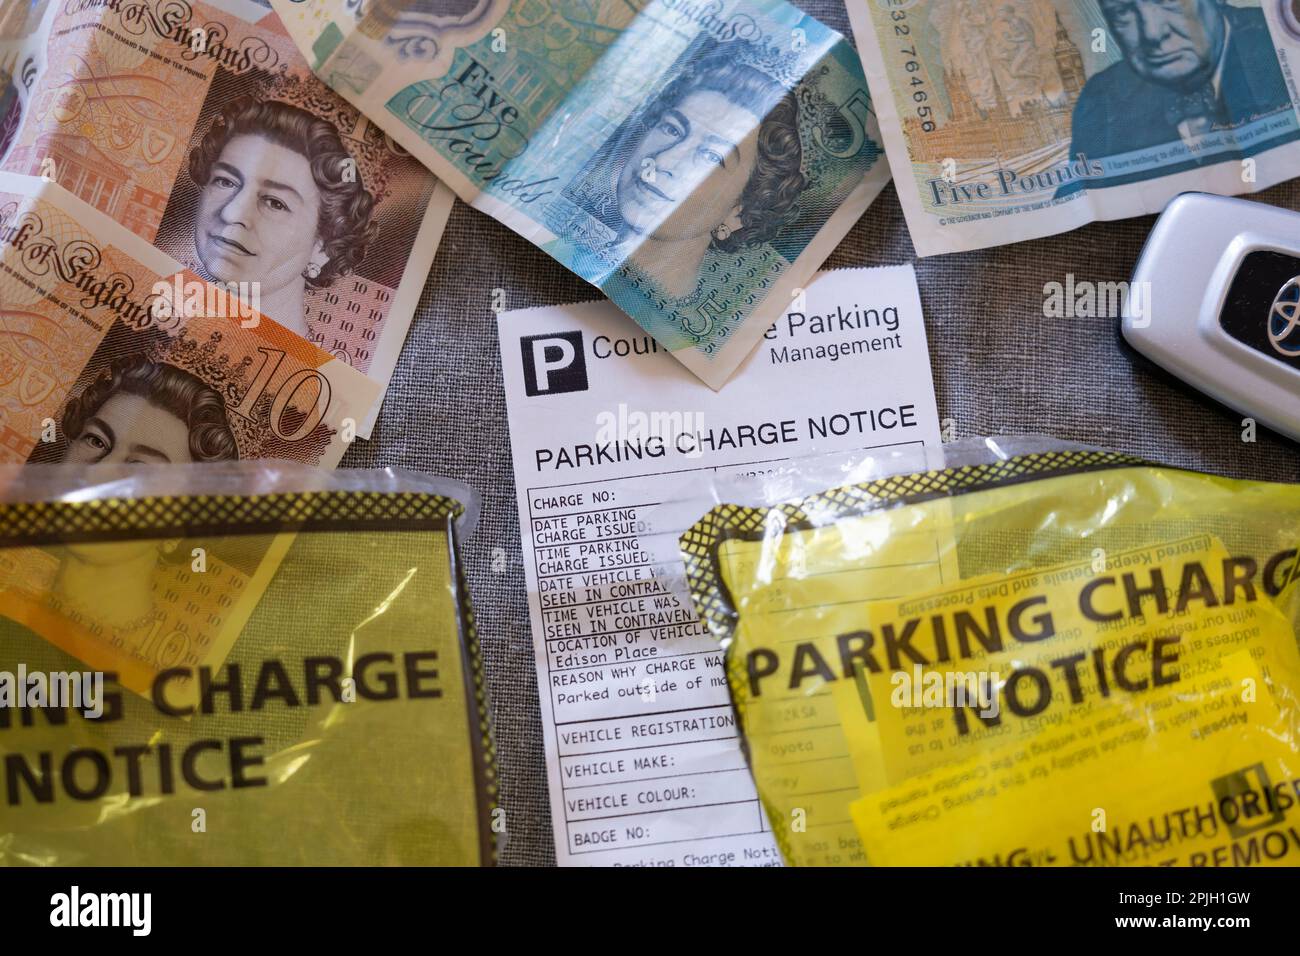 Parking charge notice ticket warning of a parking fine issued by a private parking company Countryside Parking Management. UK Stock Photo